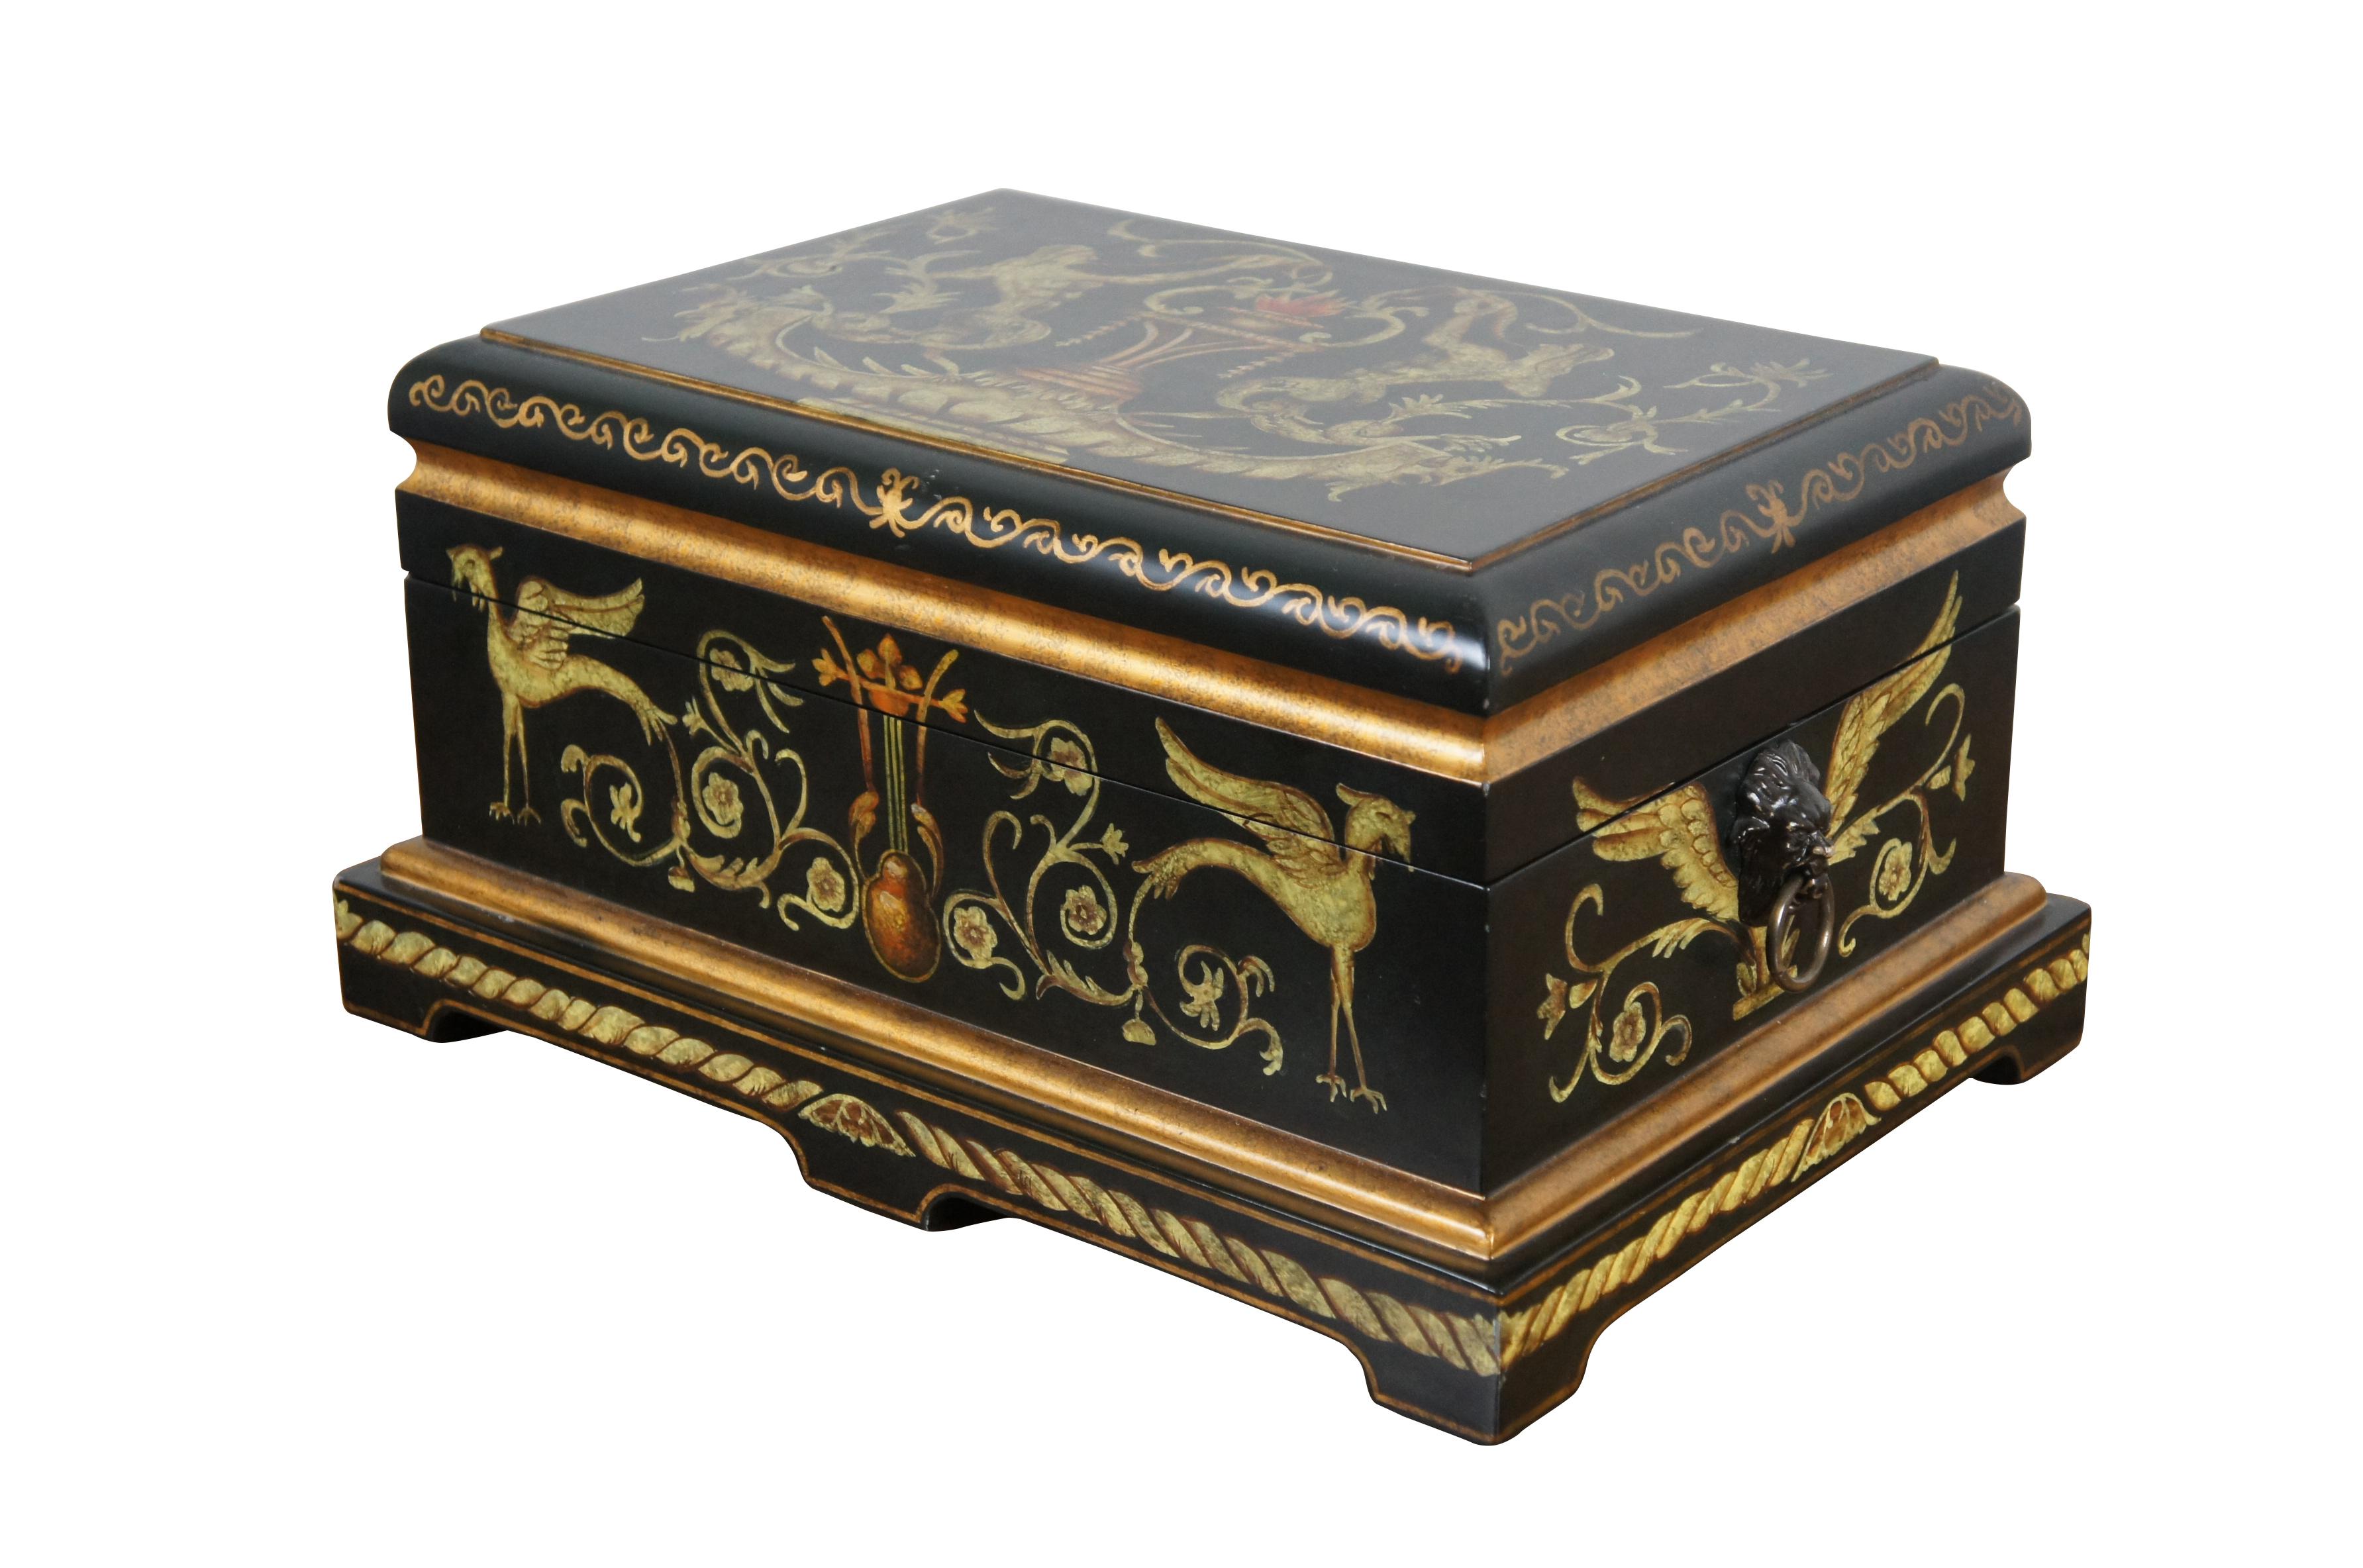 Vintage large trinket / jewelry / keepsake box / casket / chest by Castilian Imports. Item No. 7710. Rectangular form with black lacquer ground gilded with details of Neoclassical inspired griffons, winged lion's head handles and